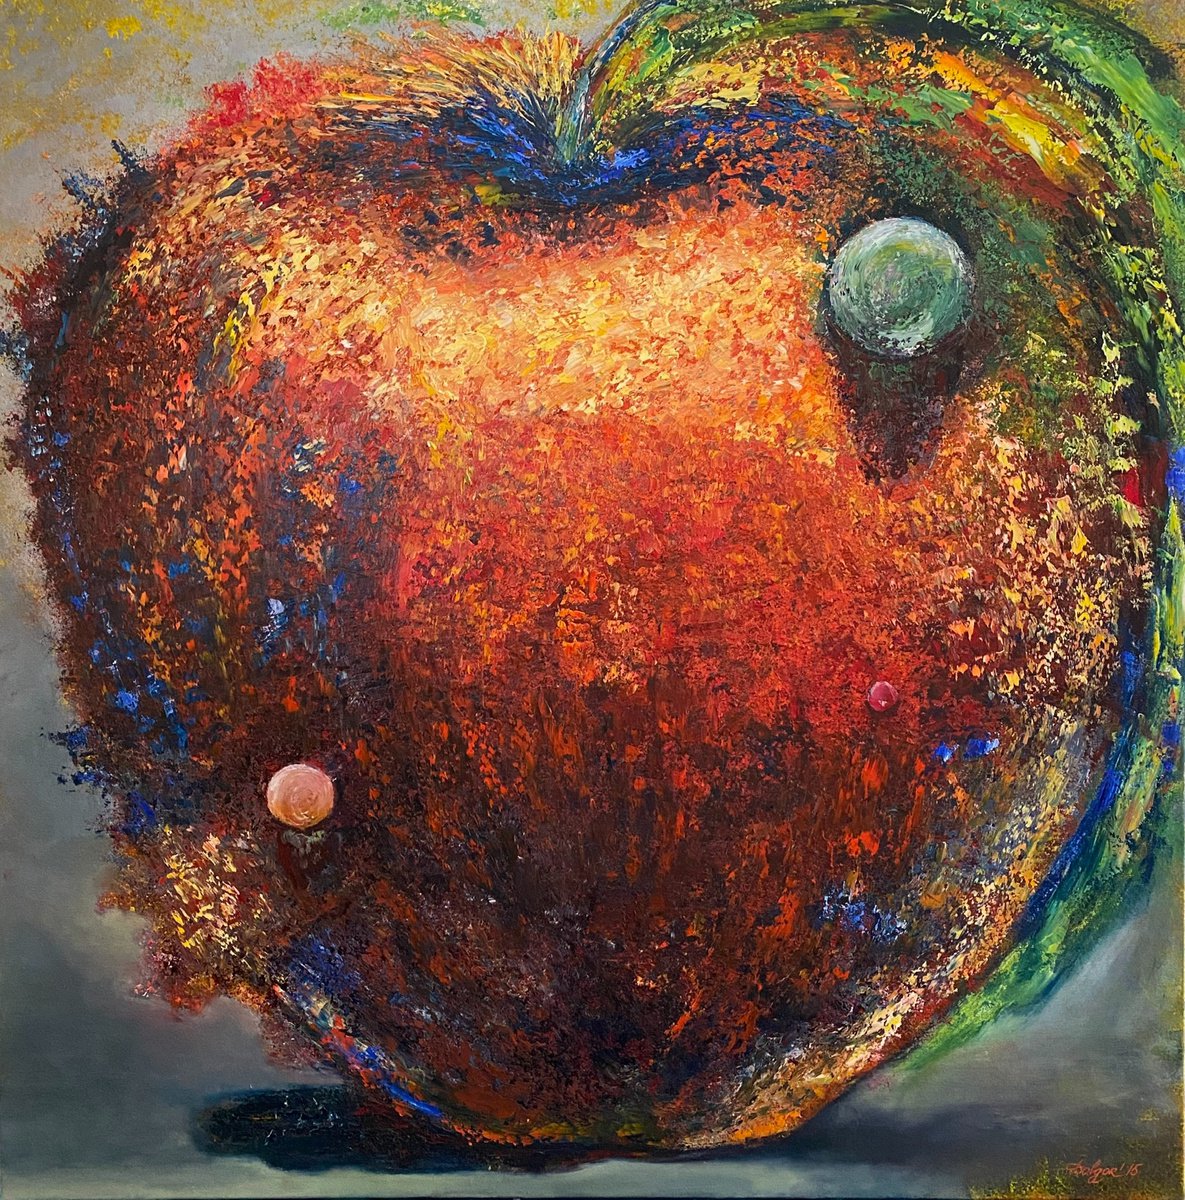 A forbidden fruit or a step to another one? by Dolgor Dugarova